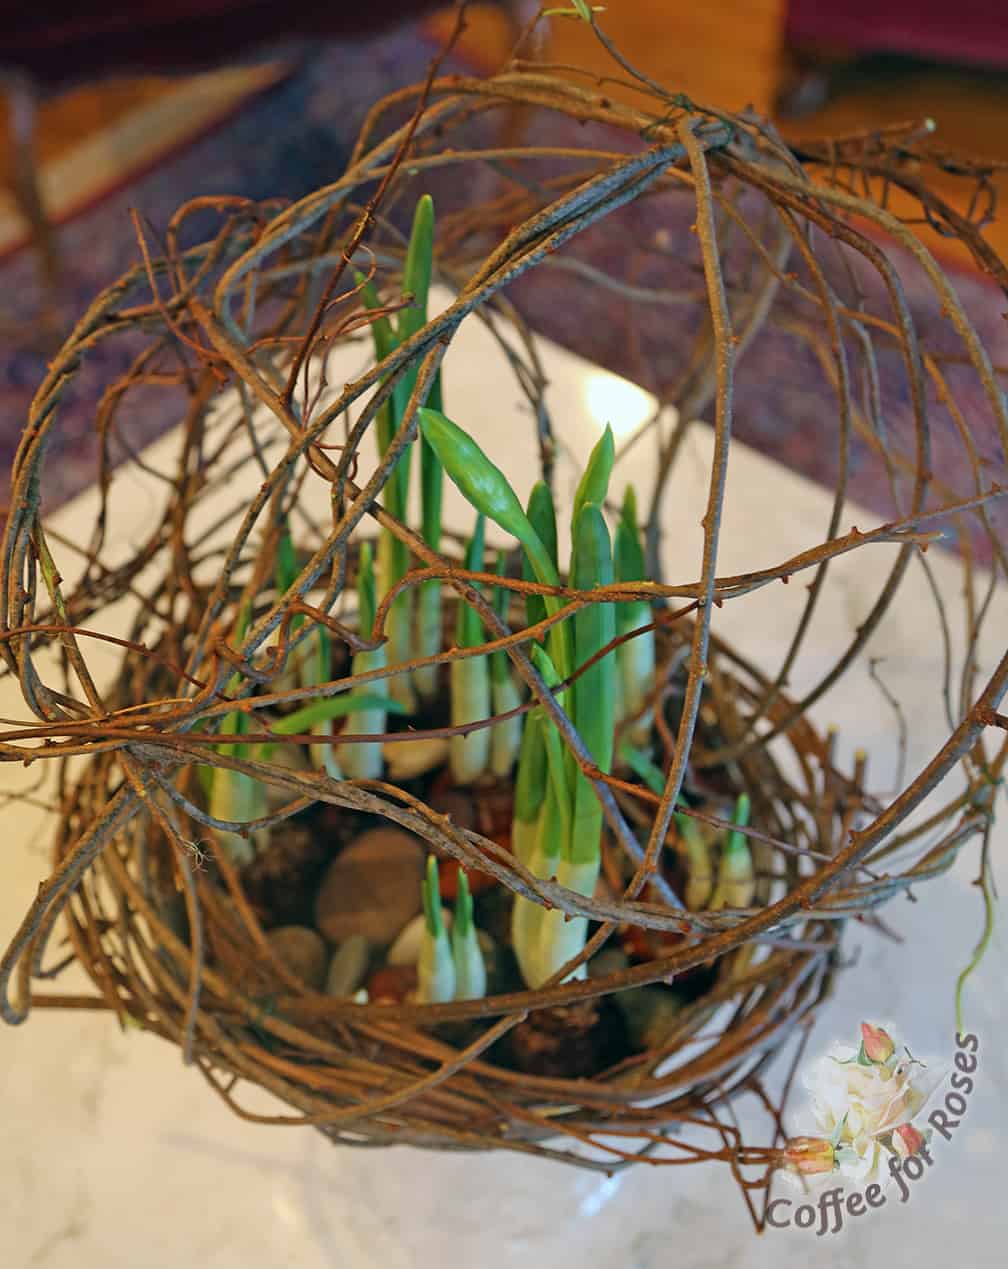 Once the ball is secured with the wires and stays together you place it over the growing narcissus bulbs.